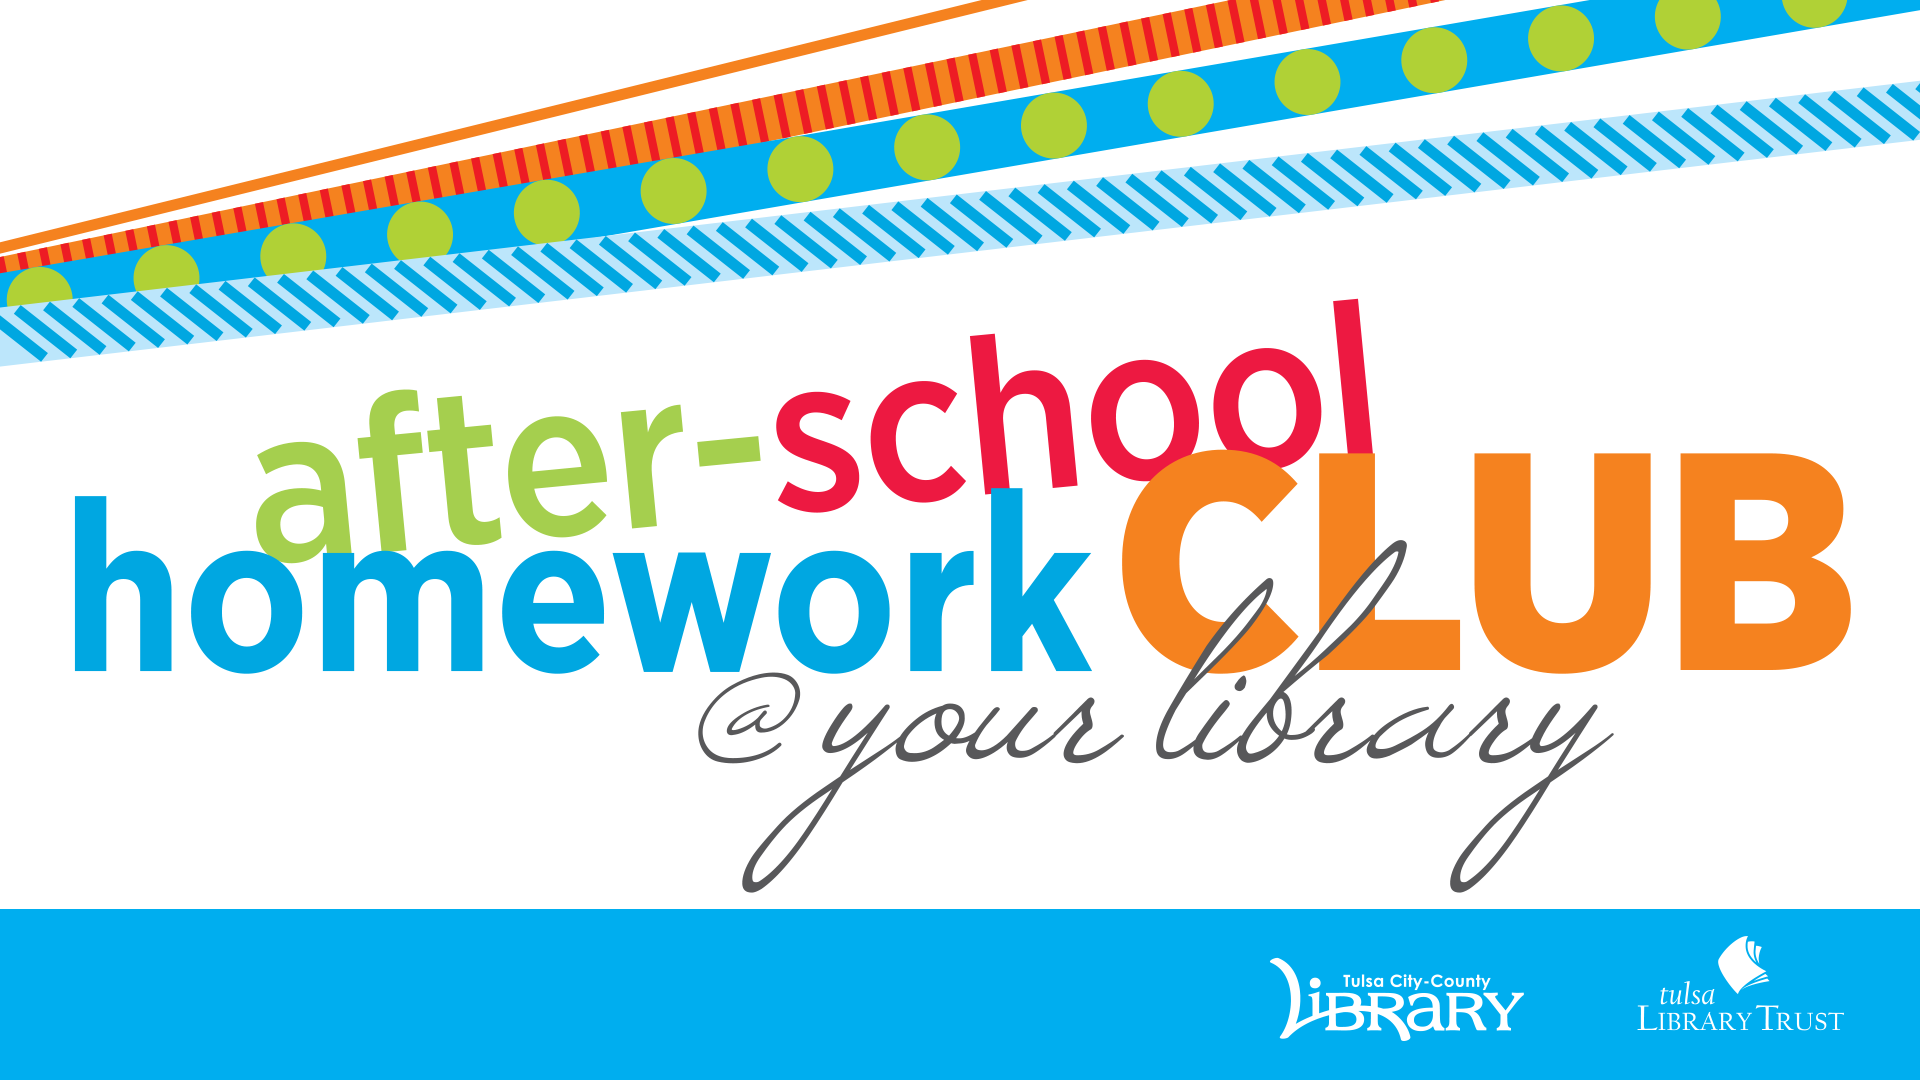 Promotional graphic for After-school Homework Club